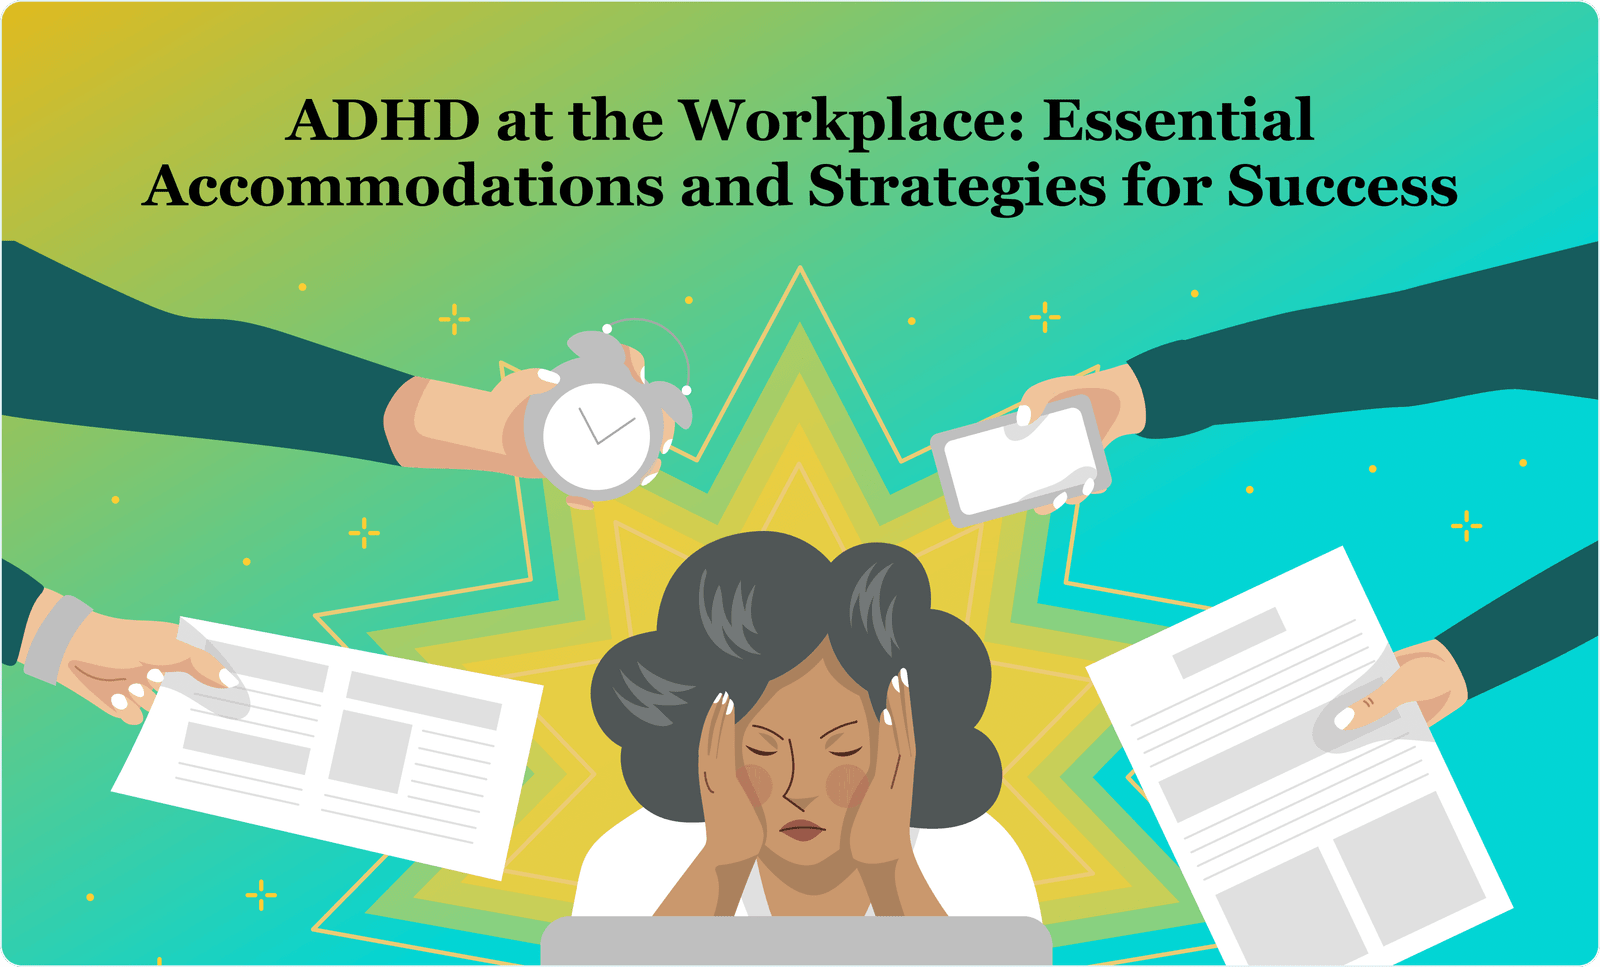 ADHD at the Workplace: Essential Accommodations and Strategies for Success